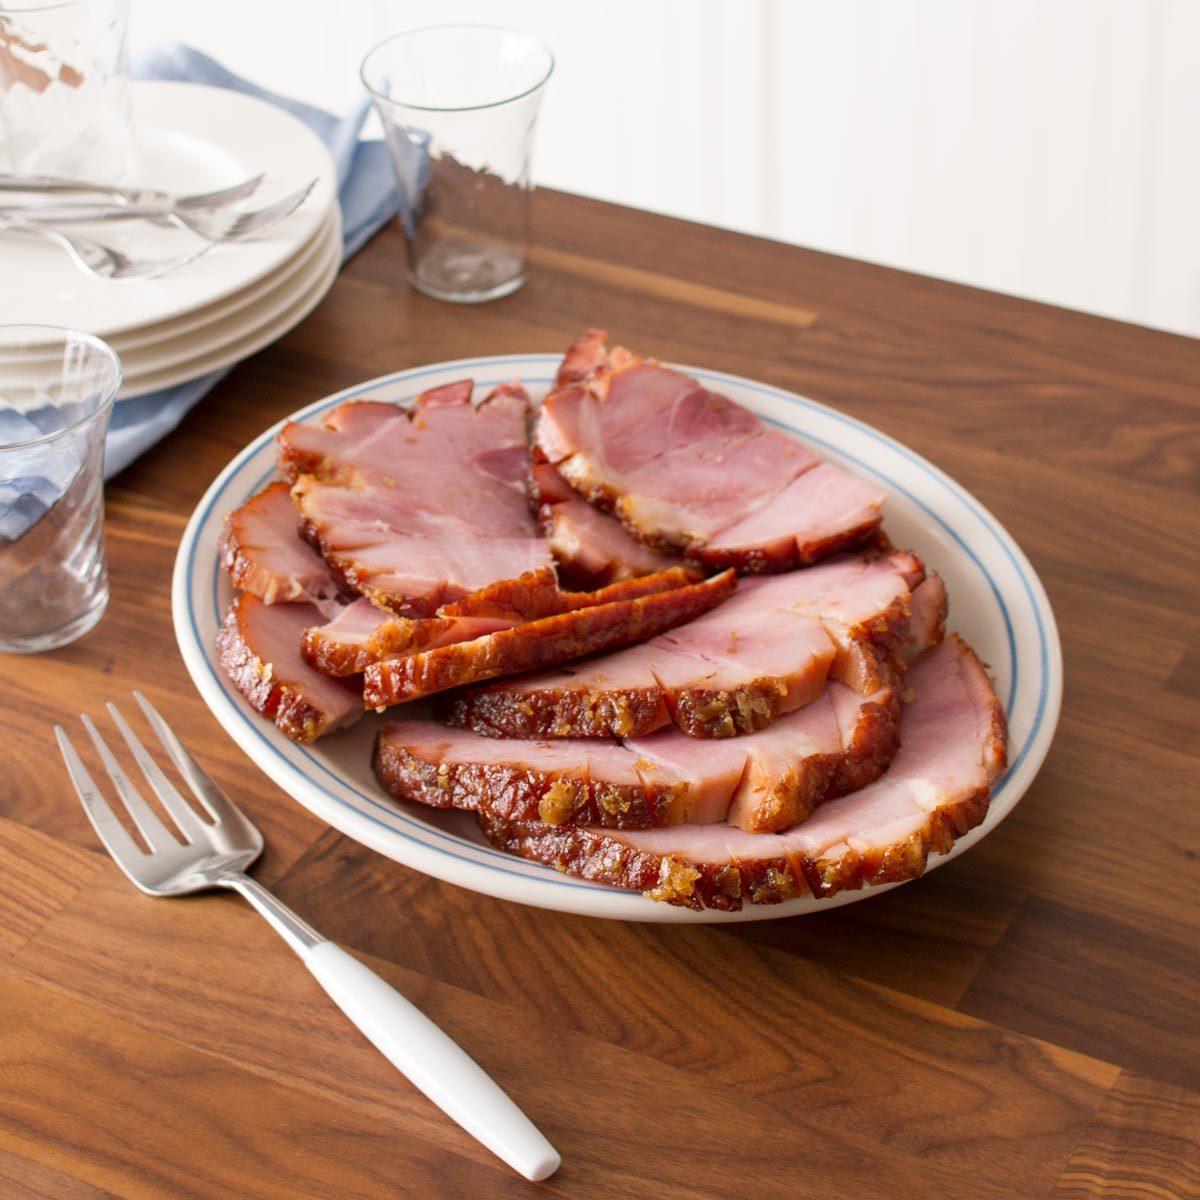 Plate of carved ham on a wood countertop